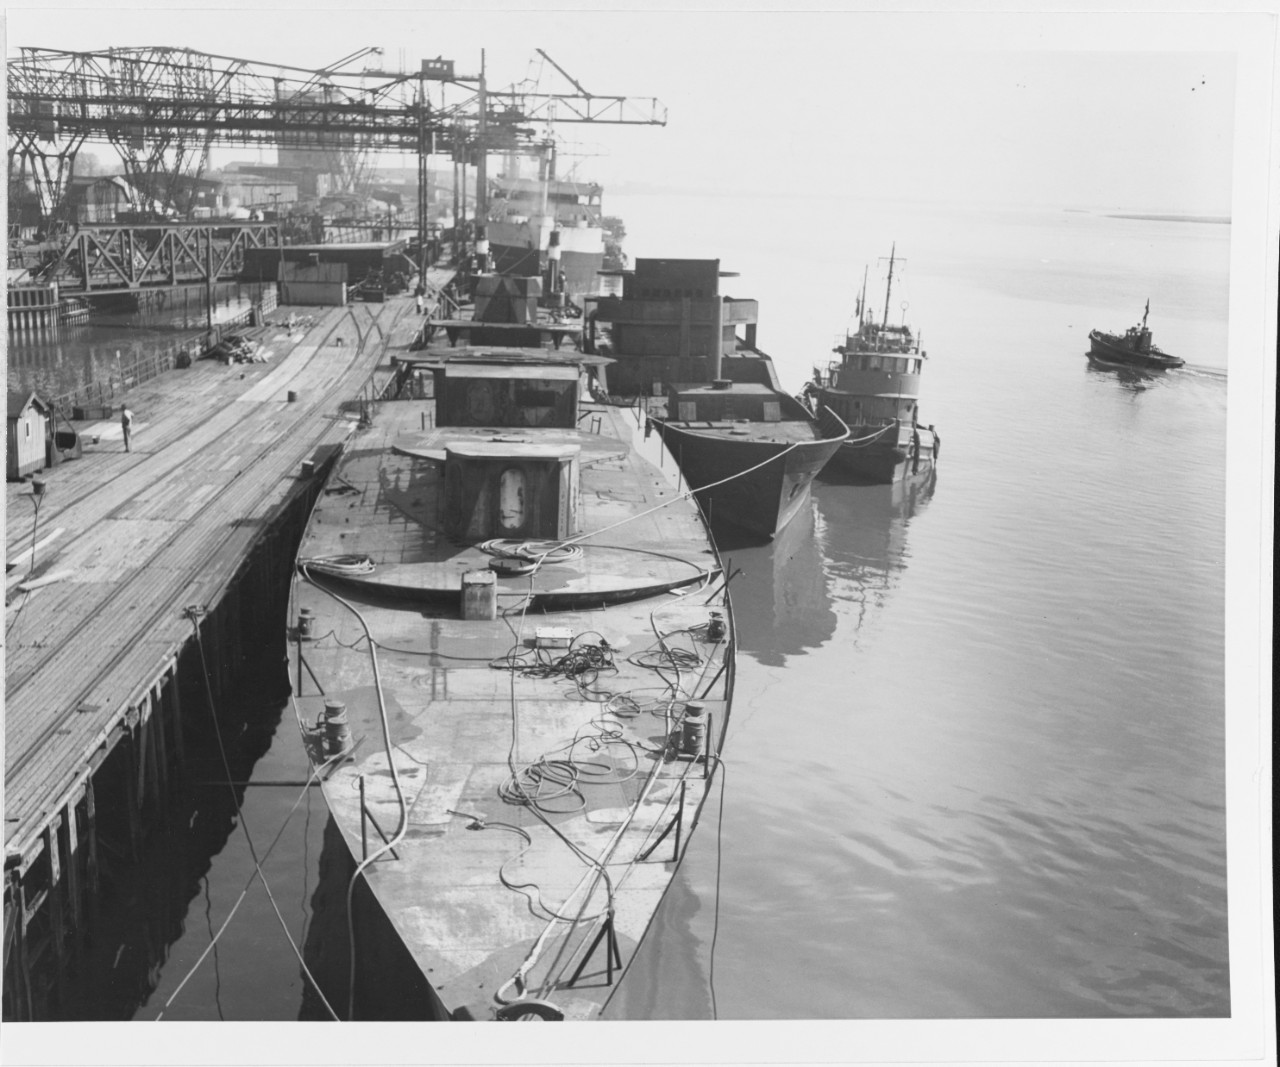 Ex-German ships at the Midgard docks of the Nordenham Sub Port of the 17th major port command, July 2, 1946